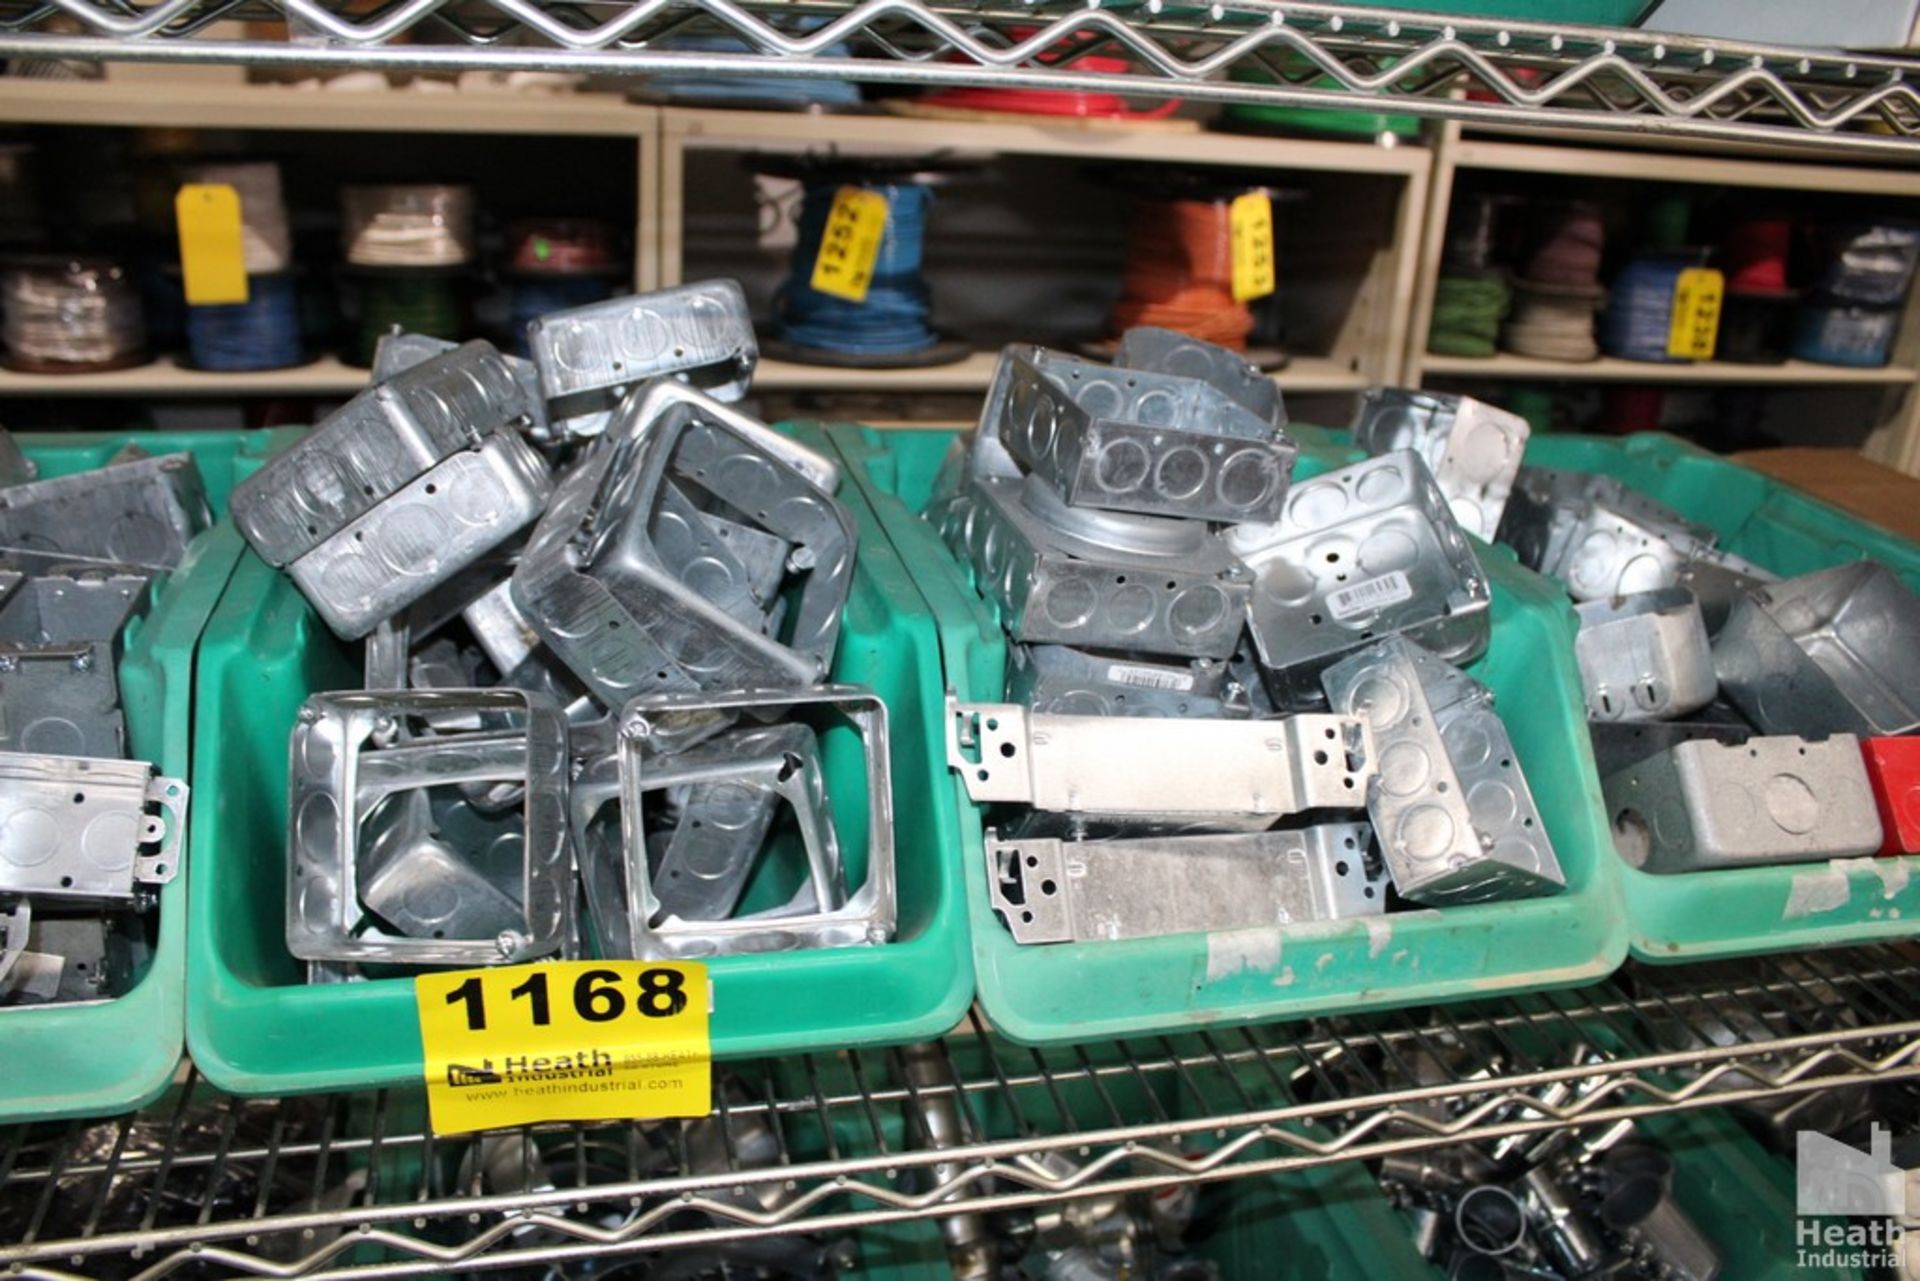 LARGE QUANTITY OF CONDUIT CONNECTORS AND ELECTRICAL BOXES ON SHELF, NO BINS - Image 3 of 4